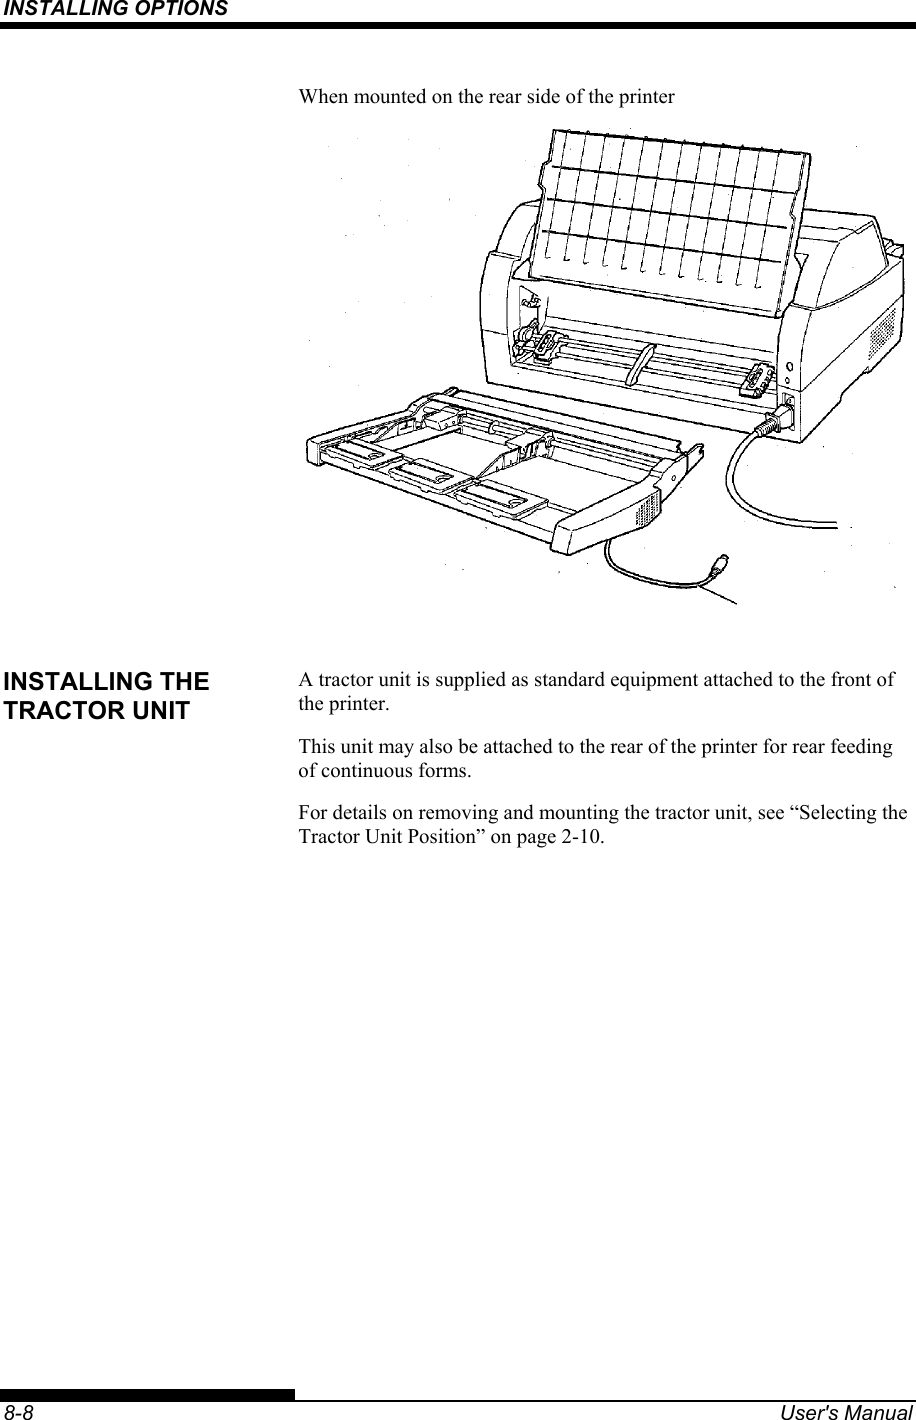 INSTALLING OPTIONS    8-8  User&apos;s Manual When mounted on the rear side of the printer   A tractor unit is supplied as standard equipment attached to the front of the printer.   This unit may also be attached to the rear of the printer for rear feeding of continuous forms. For details on removing and mounting the tractor unit, see “Selecting the Tractor Unit Position” on page 2-10.   INSTALLING THE TRACTOR UNIT 